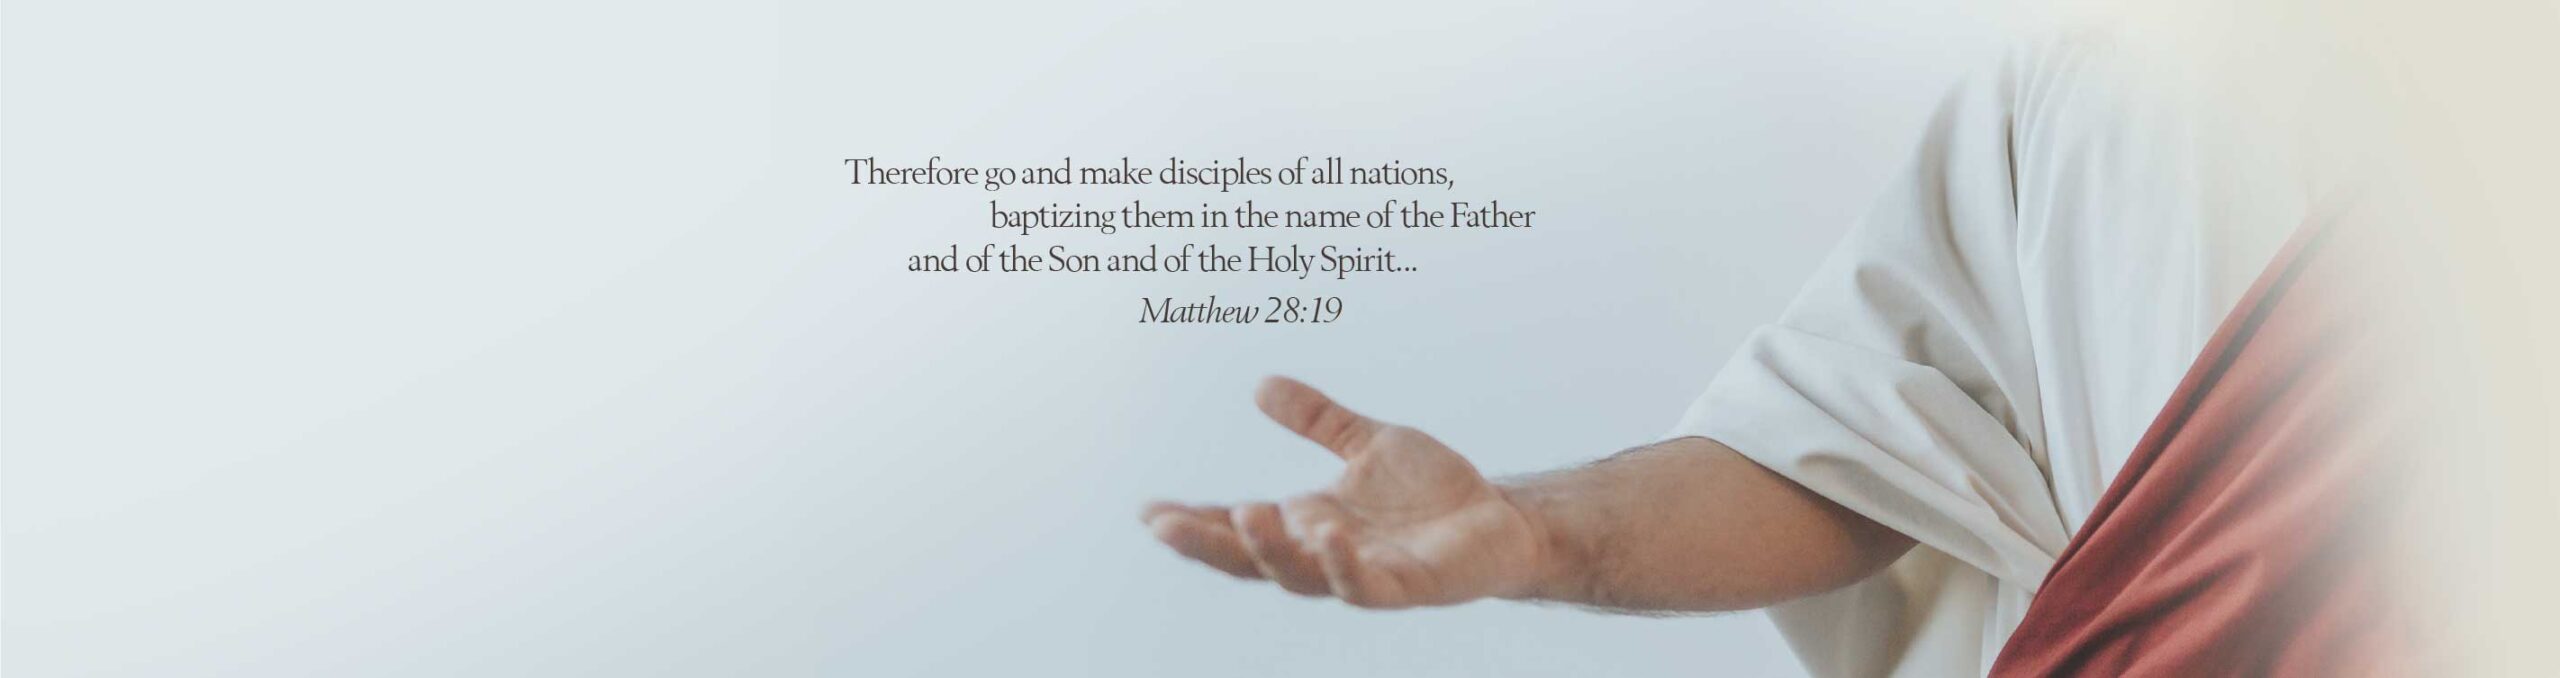 Therefore go and make disciples of all nations, baptizing them in the name of the Father and of the Son and of the Holy Spirit...